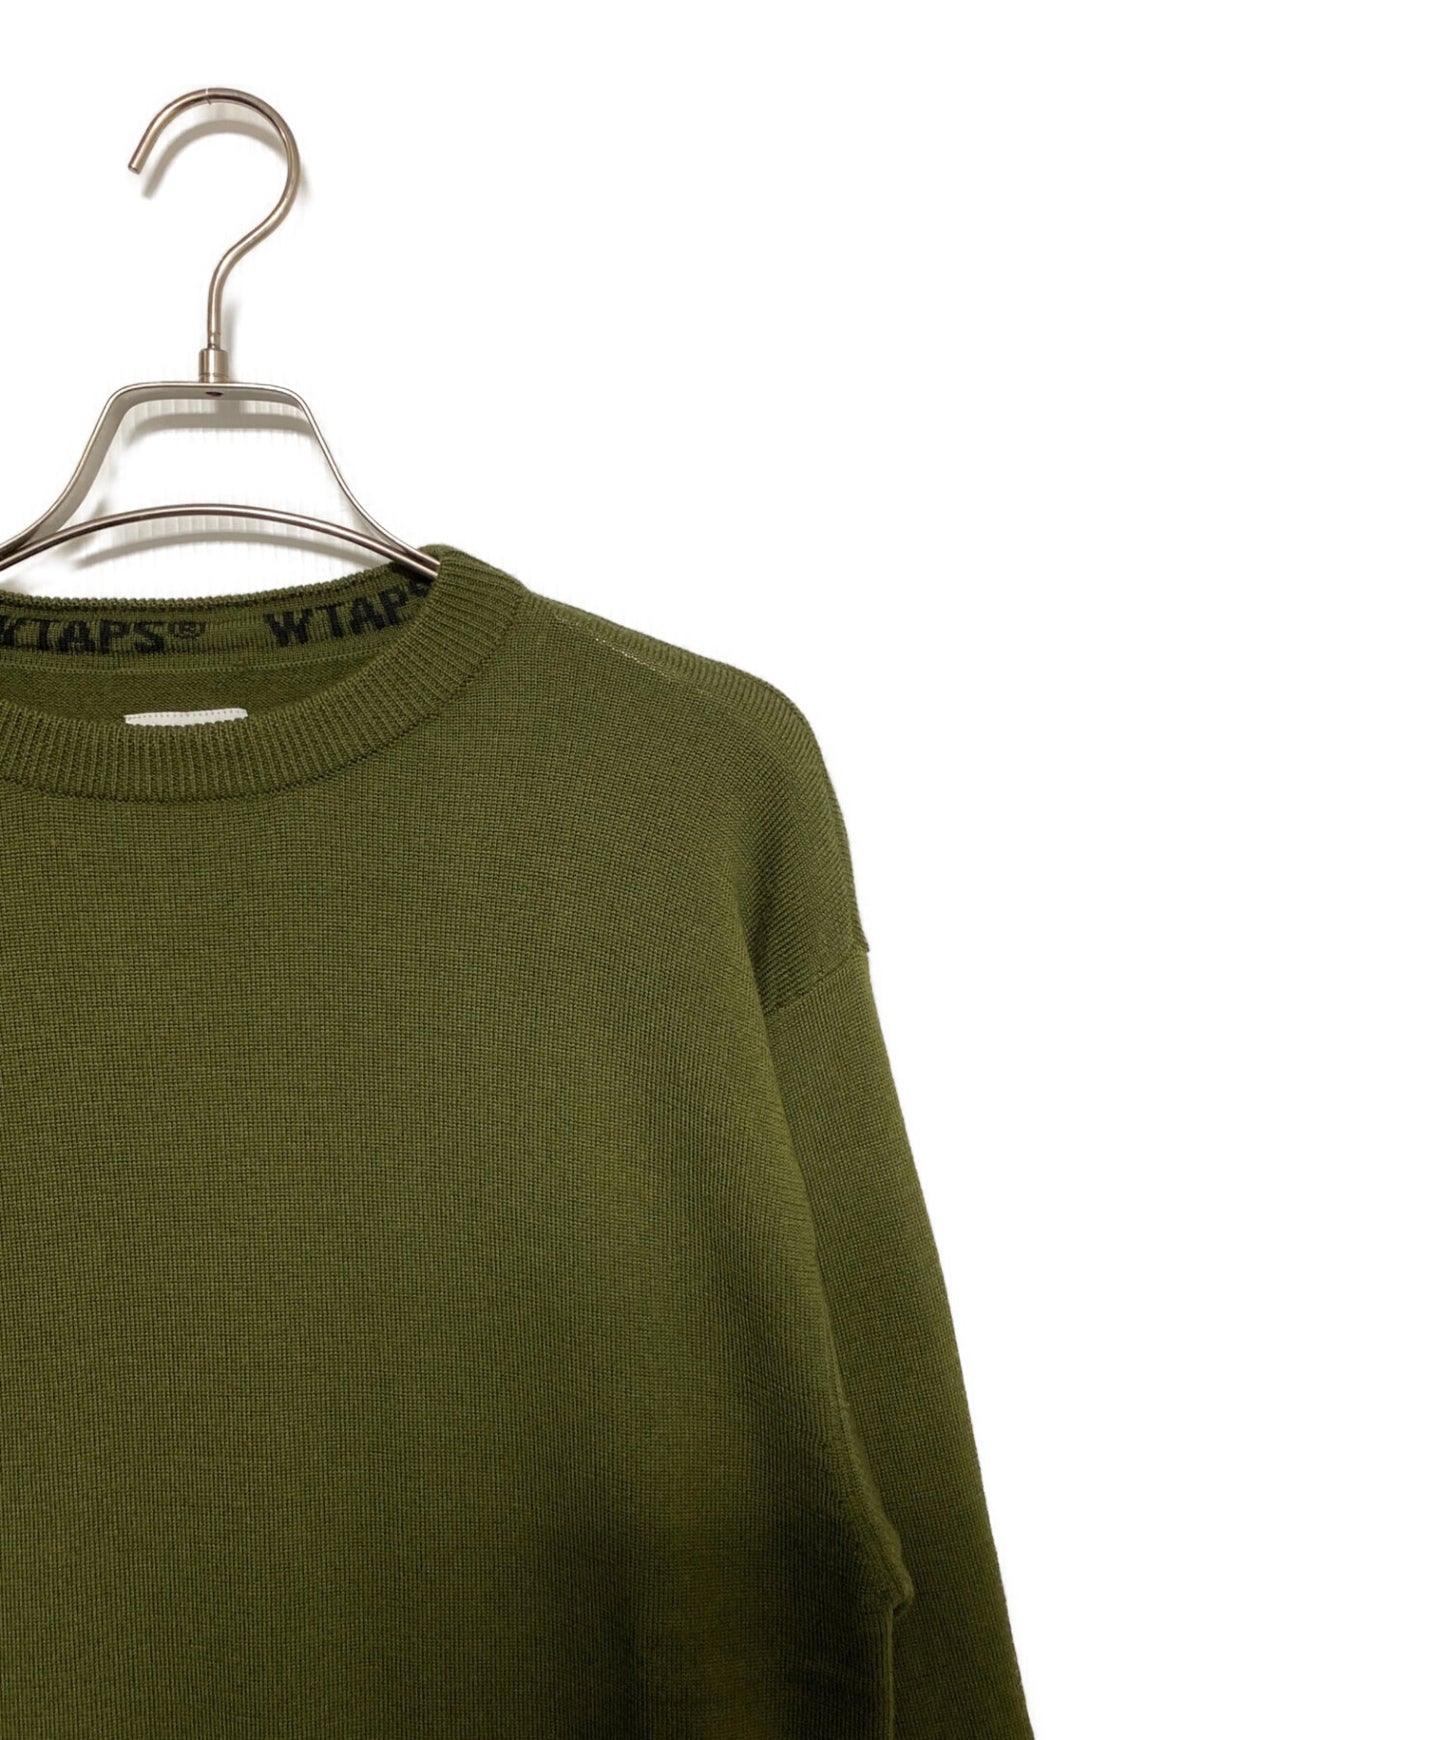 [Pre-owned] WTAPS DECK/SWEATER/WOOL ( Deck Sweater Wool ) 202MADT-KNM01